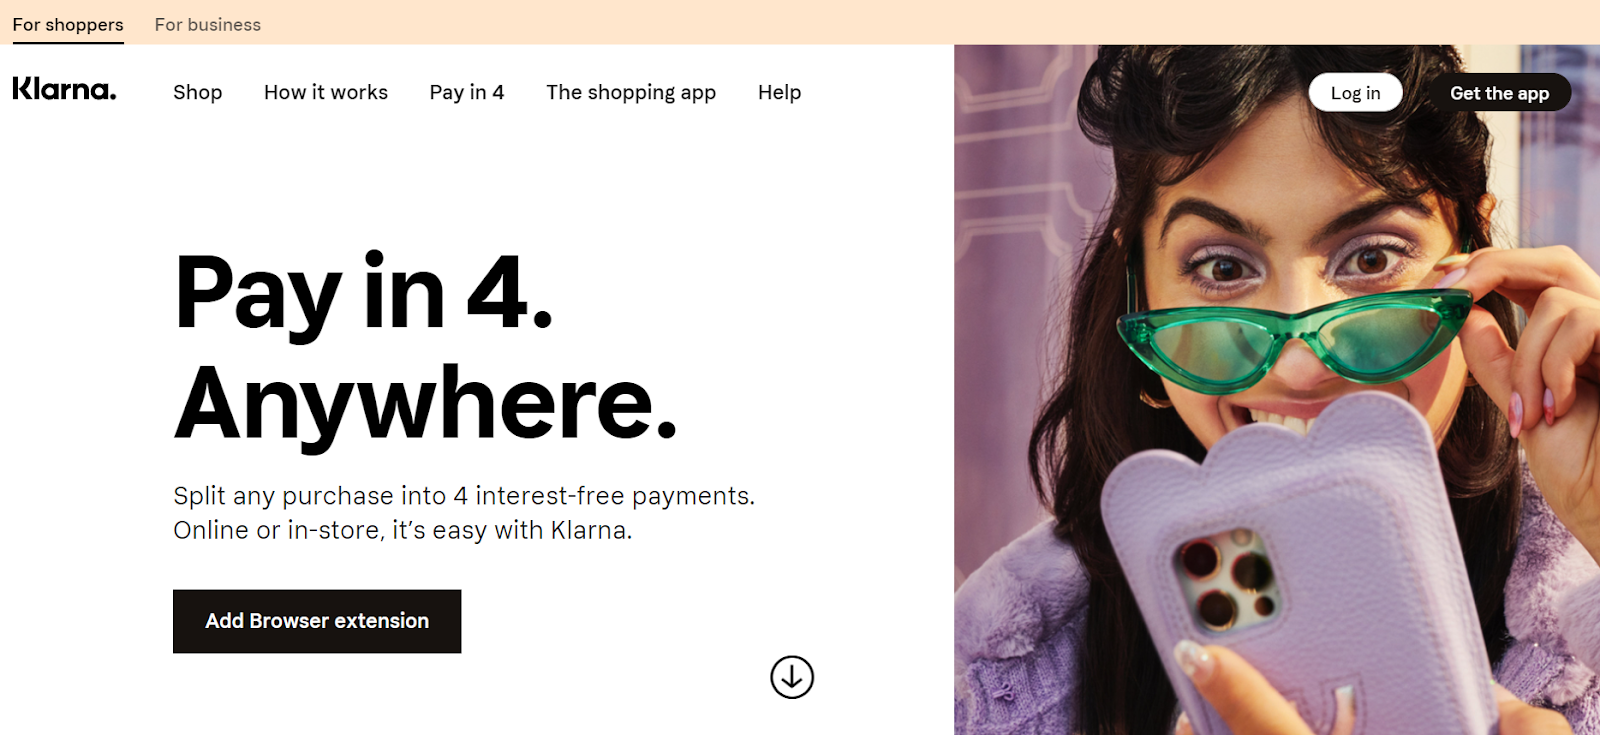 Graphic showing Klarna's Pay in 4 solution